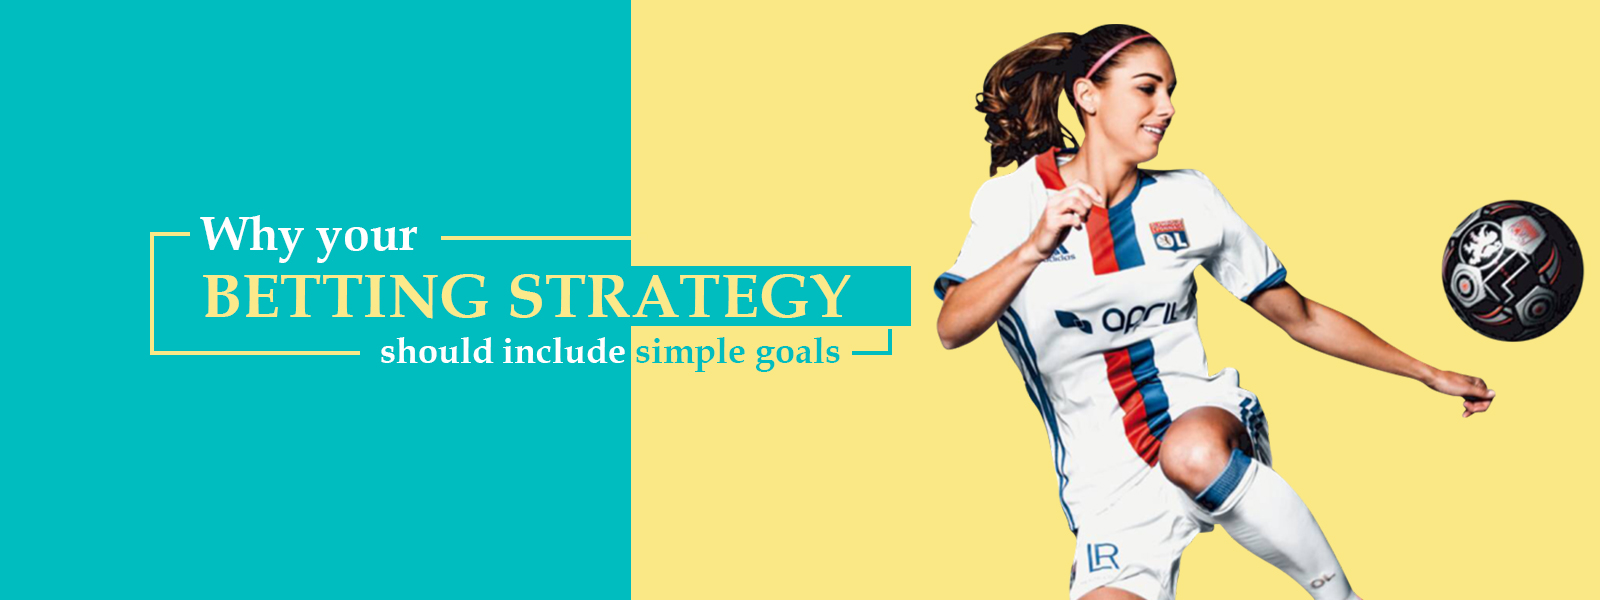 Why Your Betting Strategy Should Include Simple Goals